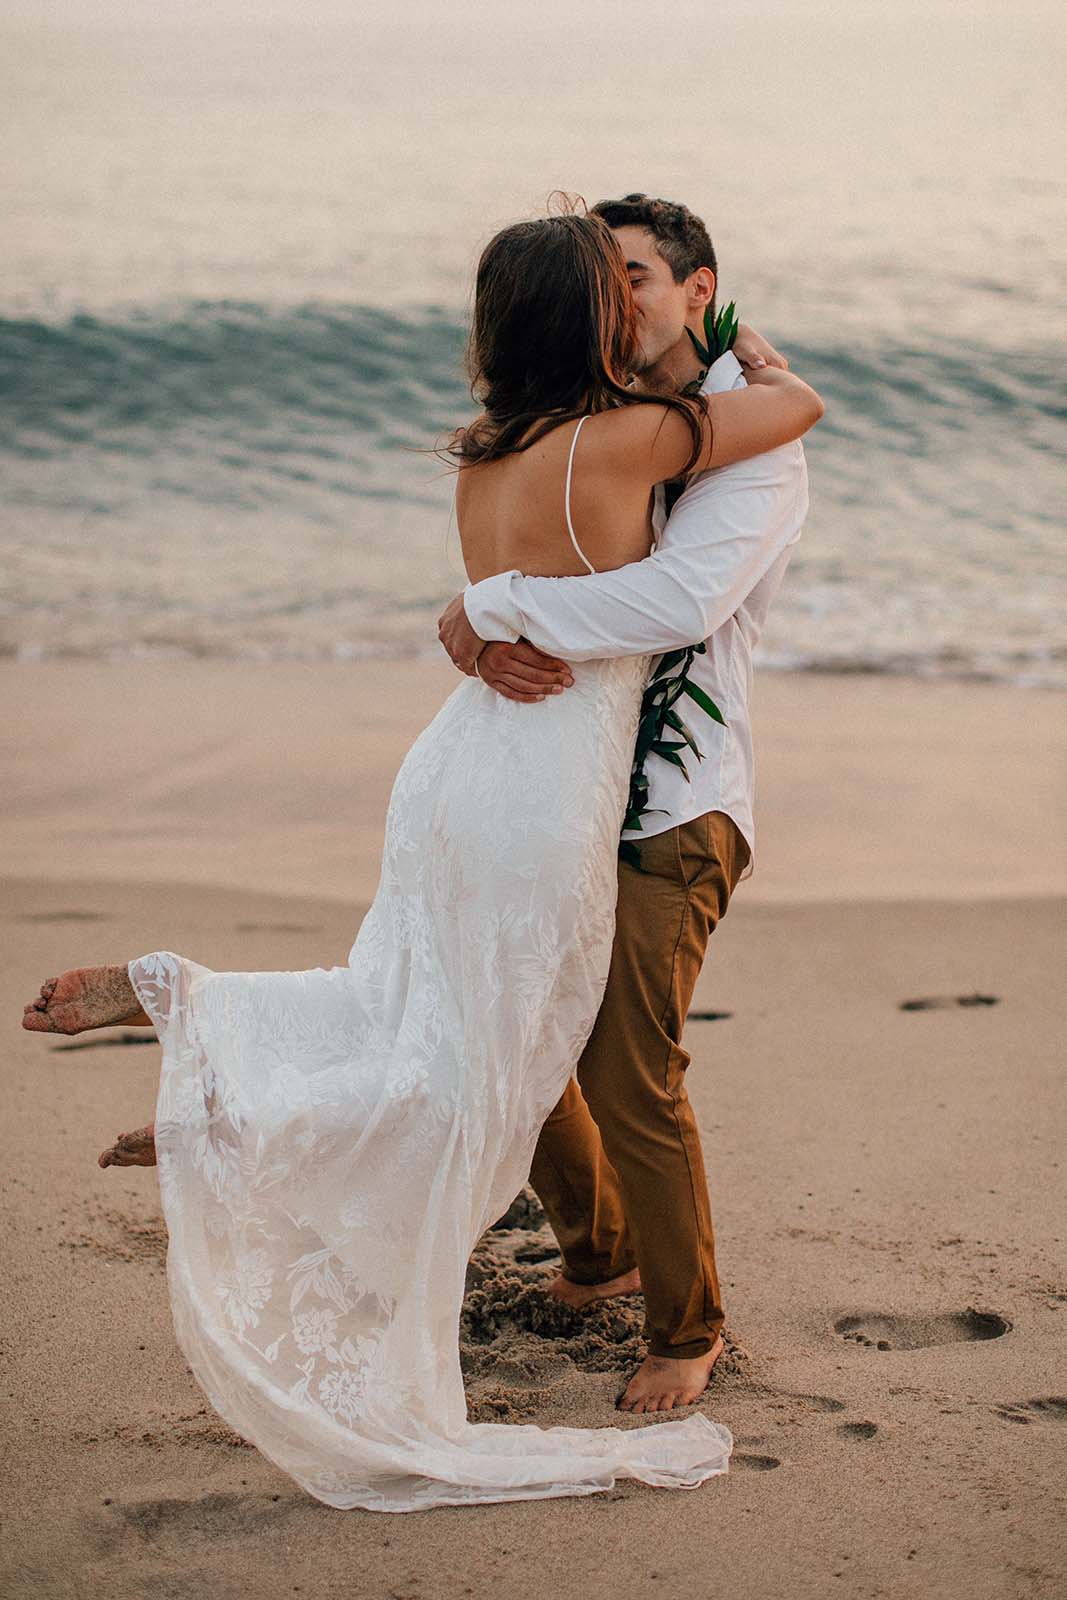 Bride and groom, sharing a romantic kiss on the beach